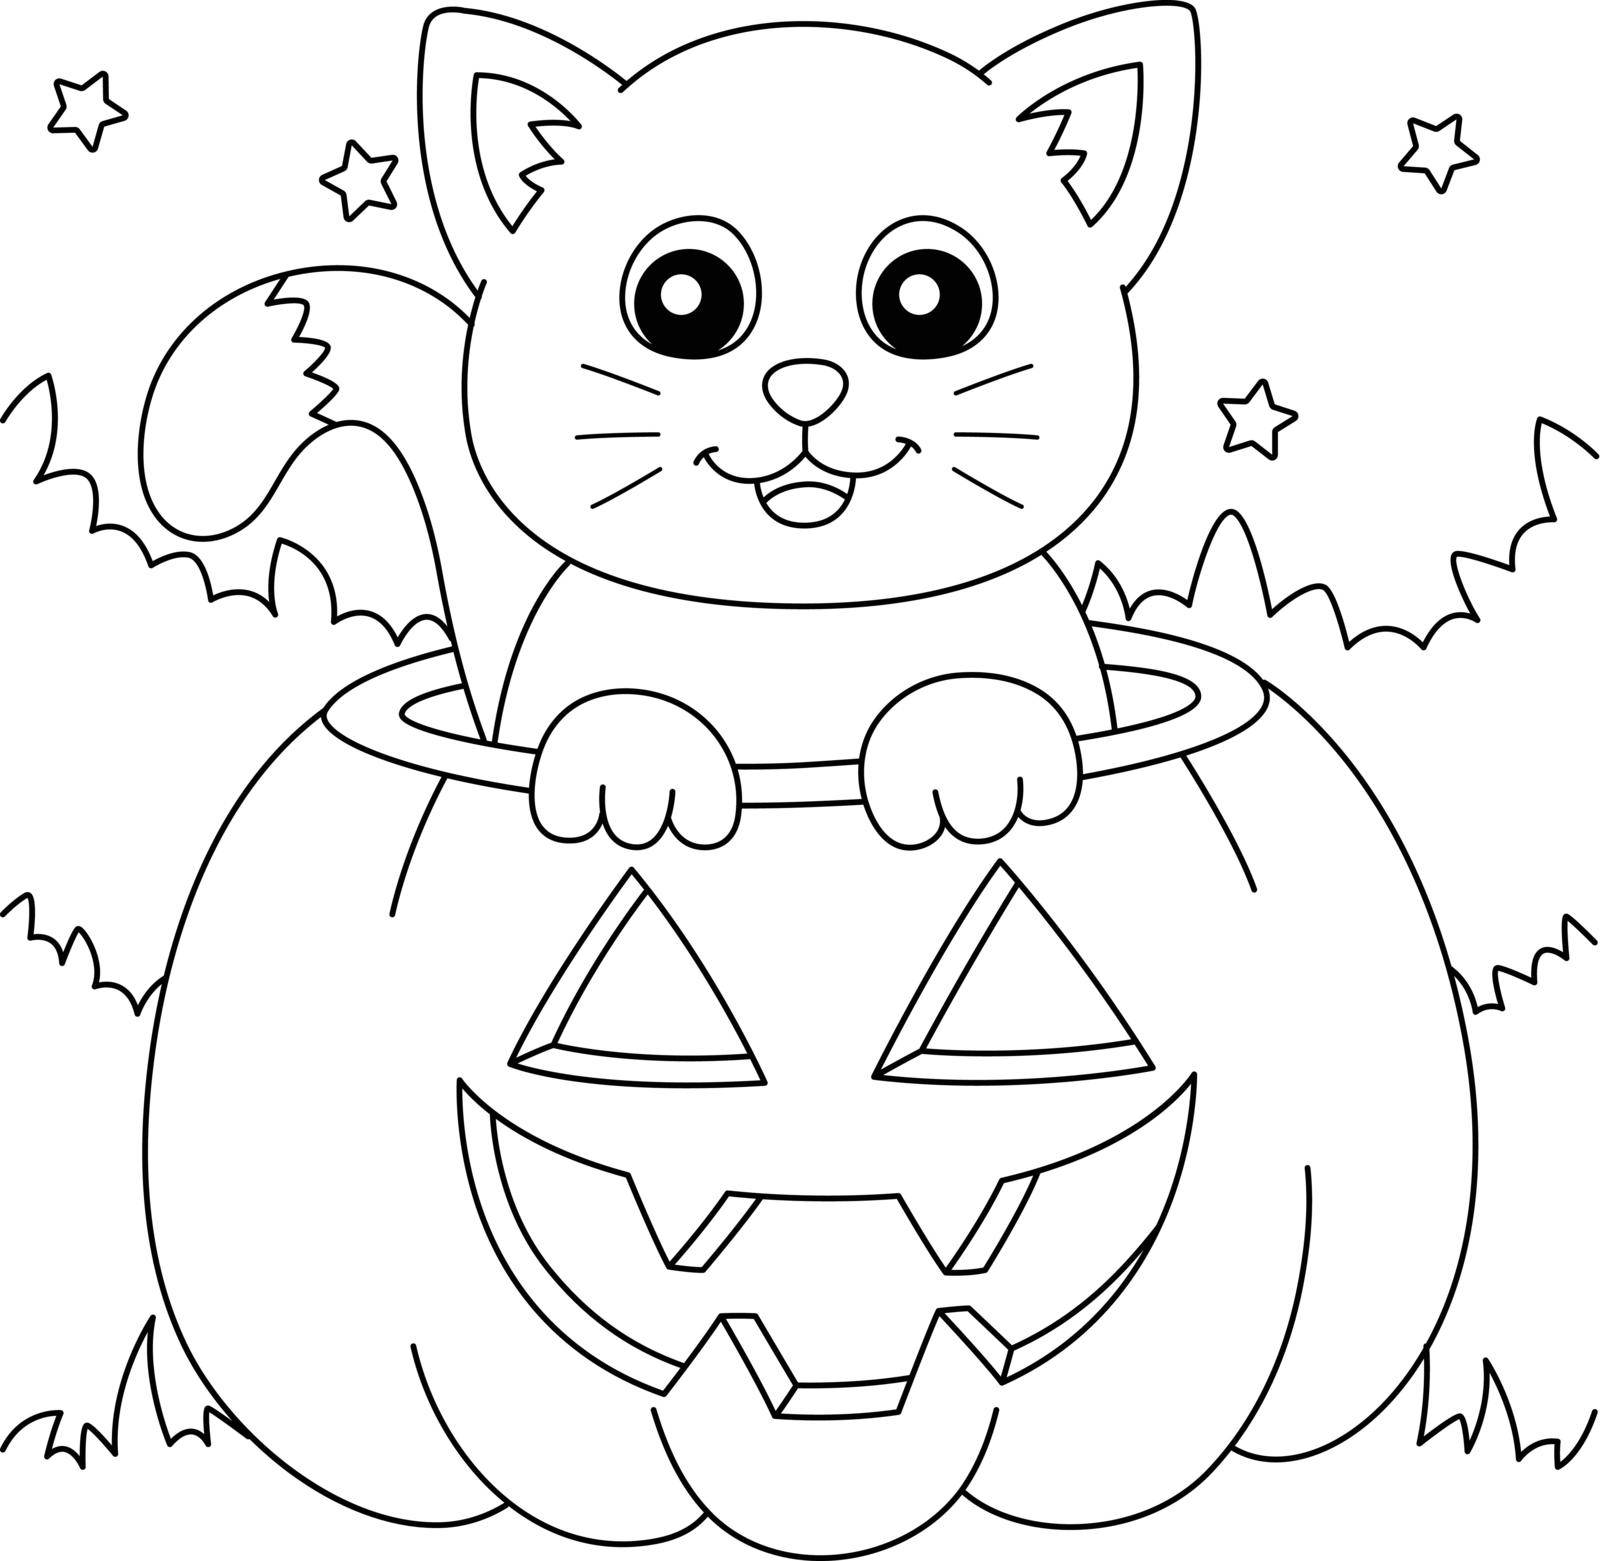 A cute and funny coloring page of a pumpkin cat on Halloween. Provides hours of coloring fun for children. To color, this page is very easy. Suitable for little kids and toddlers.